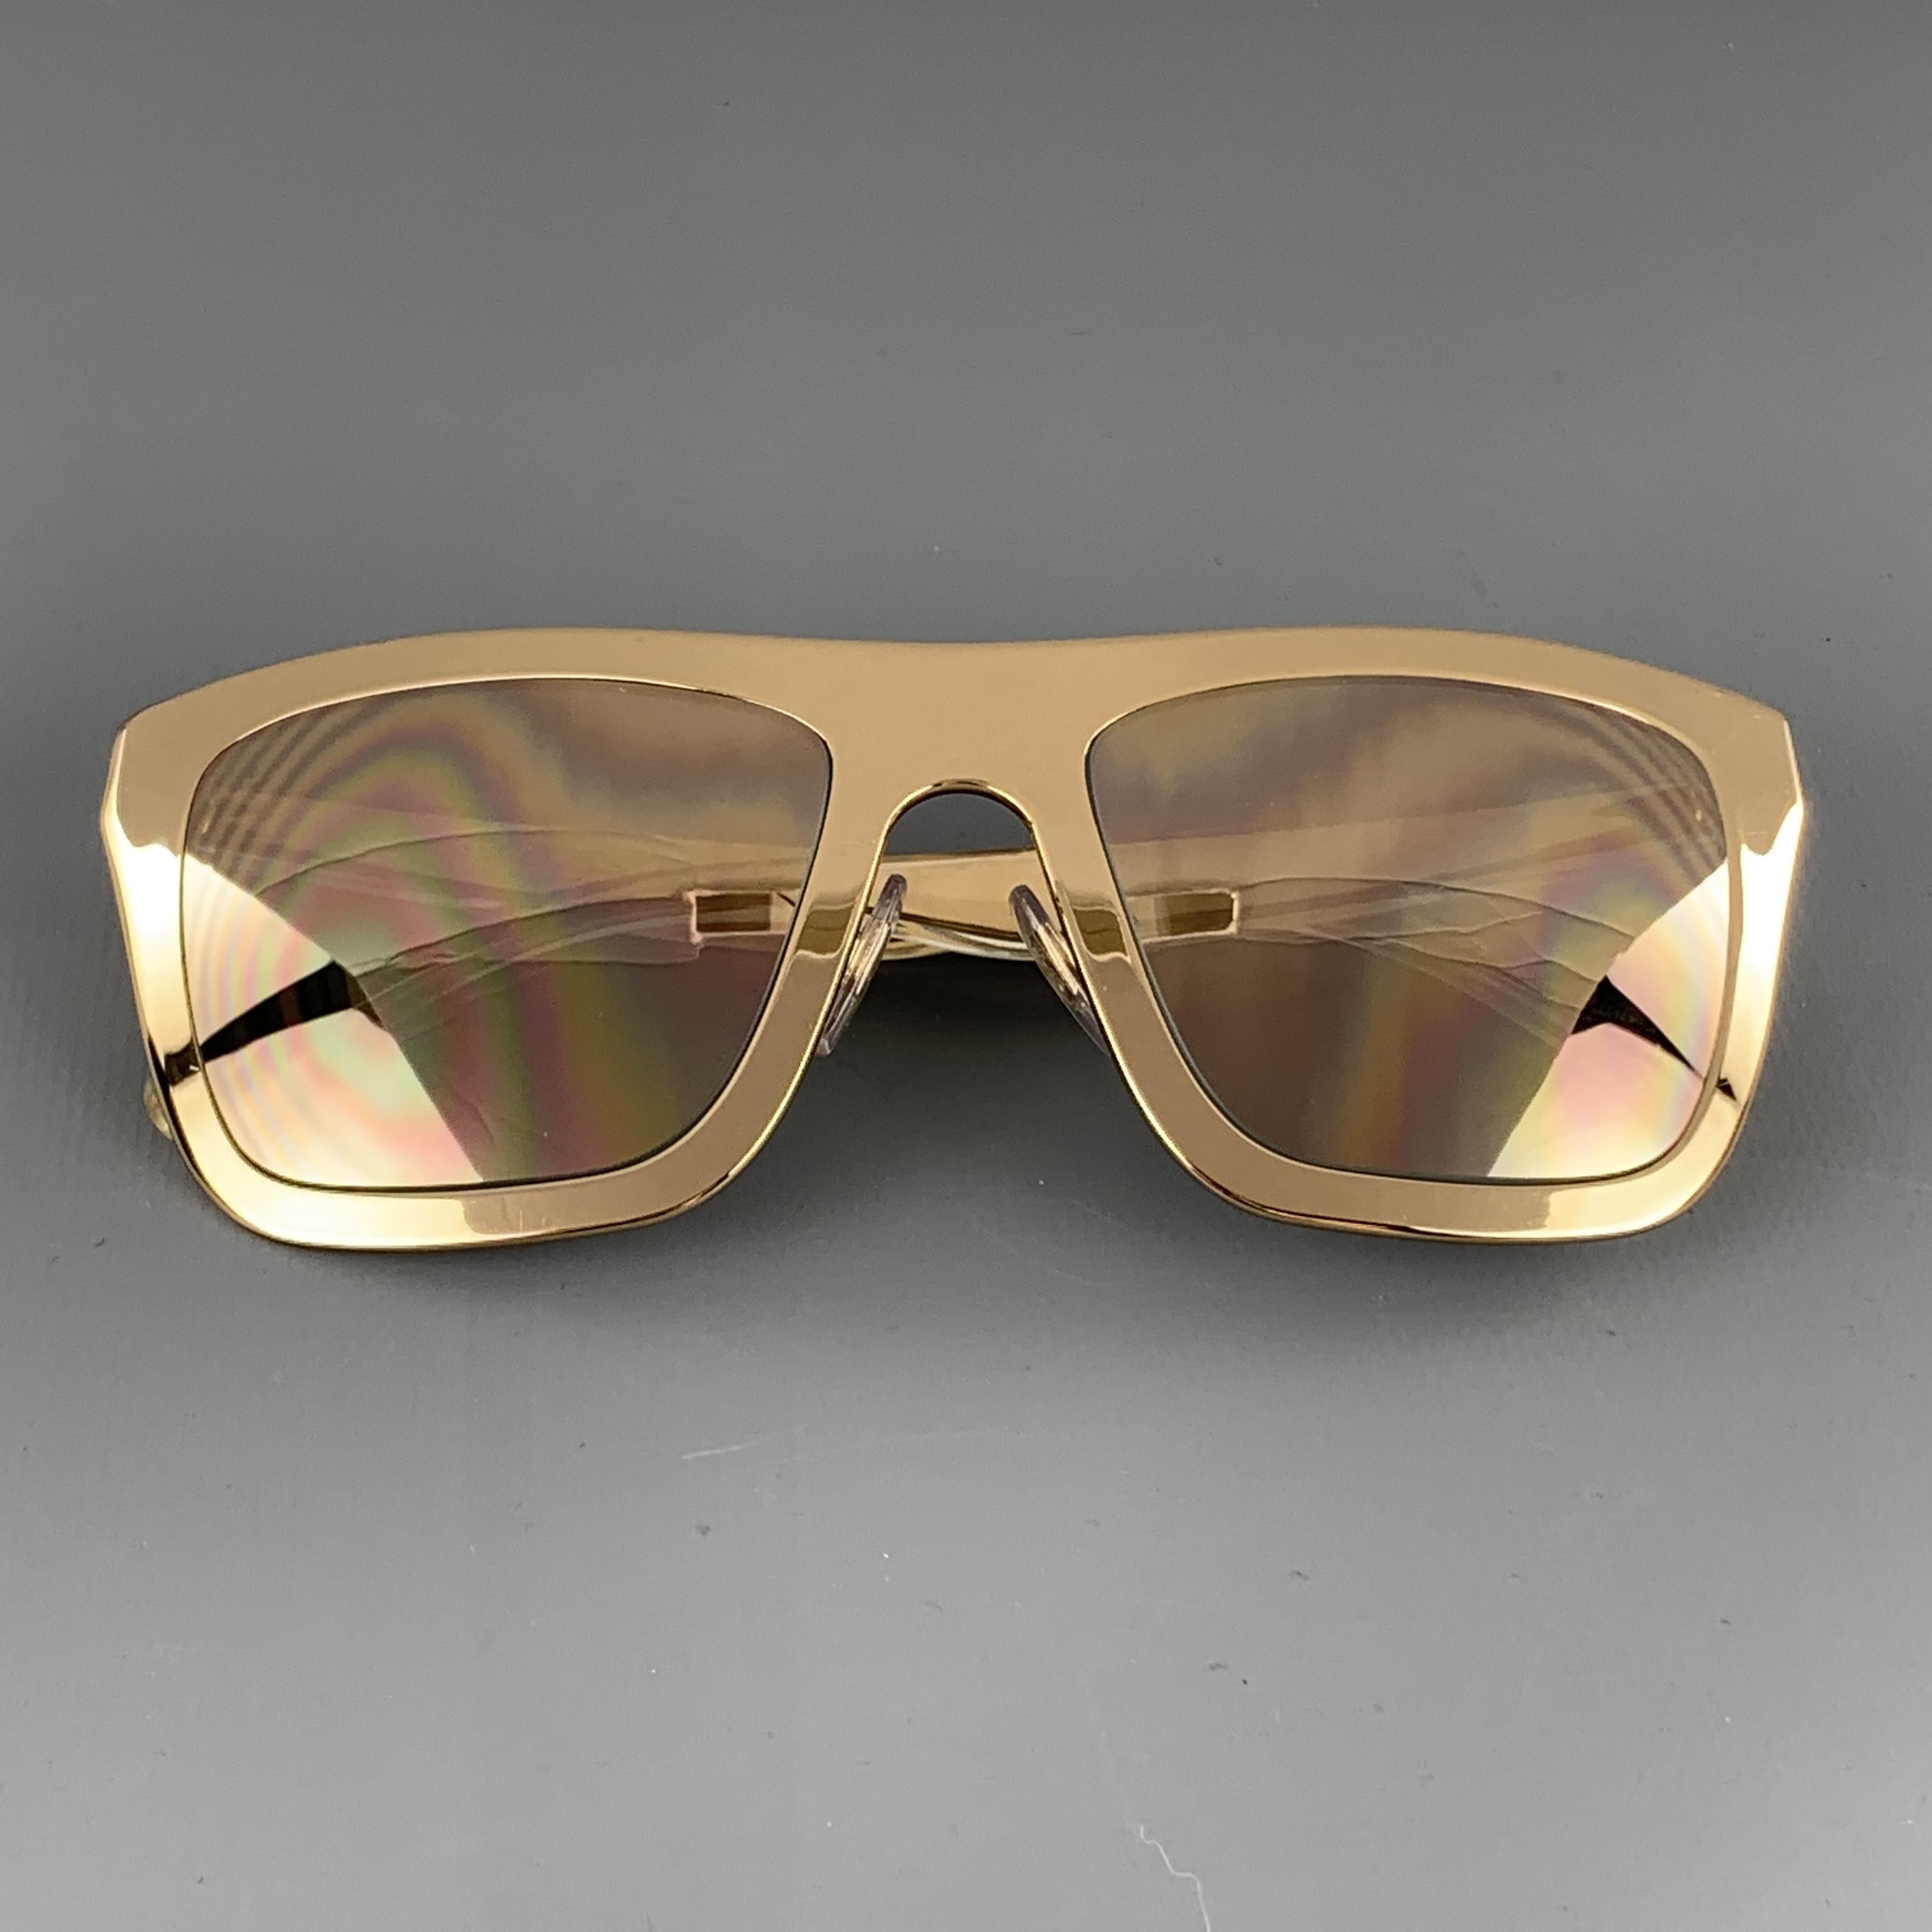 DOLCE & GABBANA sunglasses come in 18 karat gold plated polished metal in an oversized wayfarer shape with mirrored lenses and clear acrylic encased metal arms. Includes case. Made in Italy.

Very Good Pre-Owned Condition.
Marked: GOLD PLATED